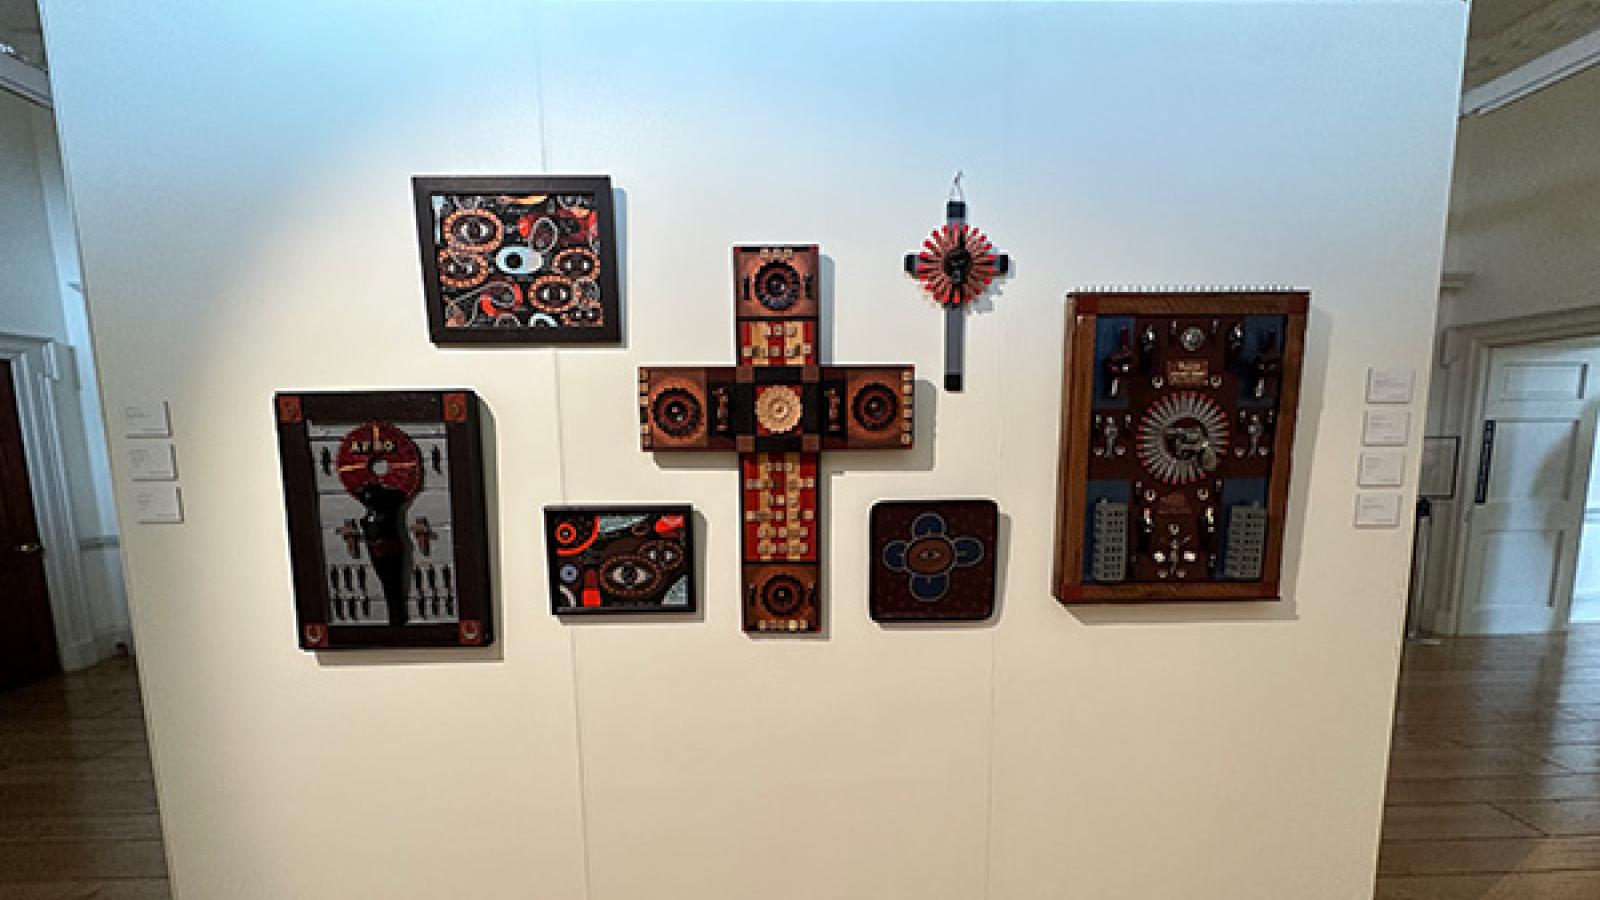 PhD Student Sterling Nix Travels to London for 1-54ArtFair for Contemporary African Art